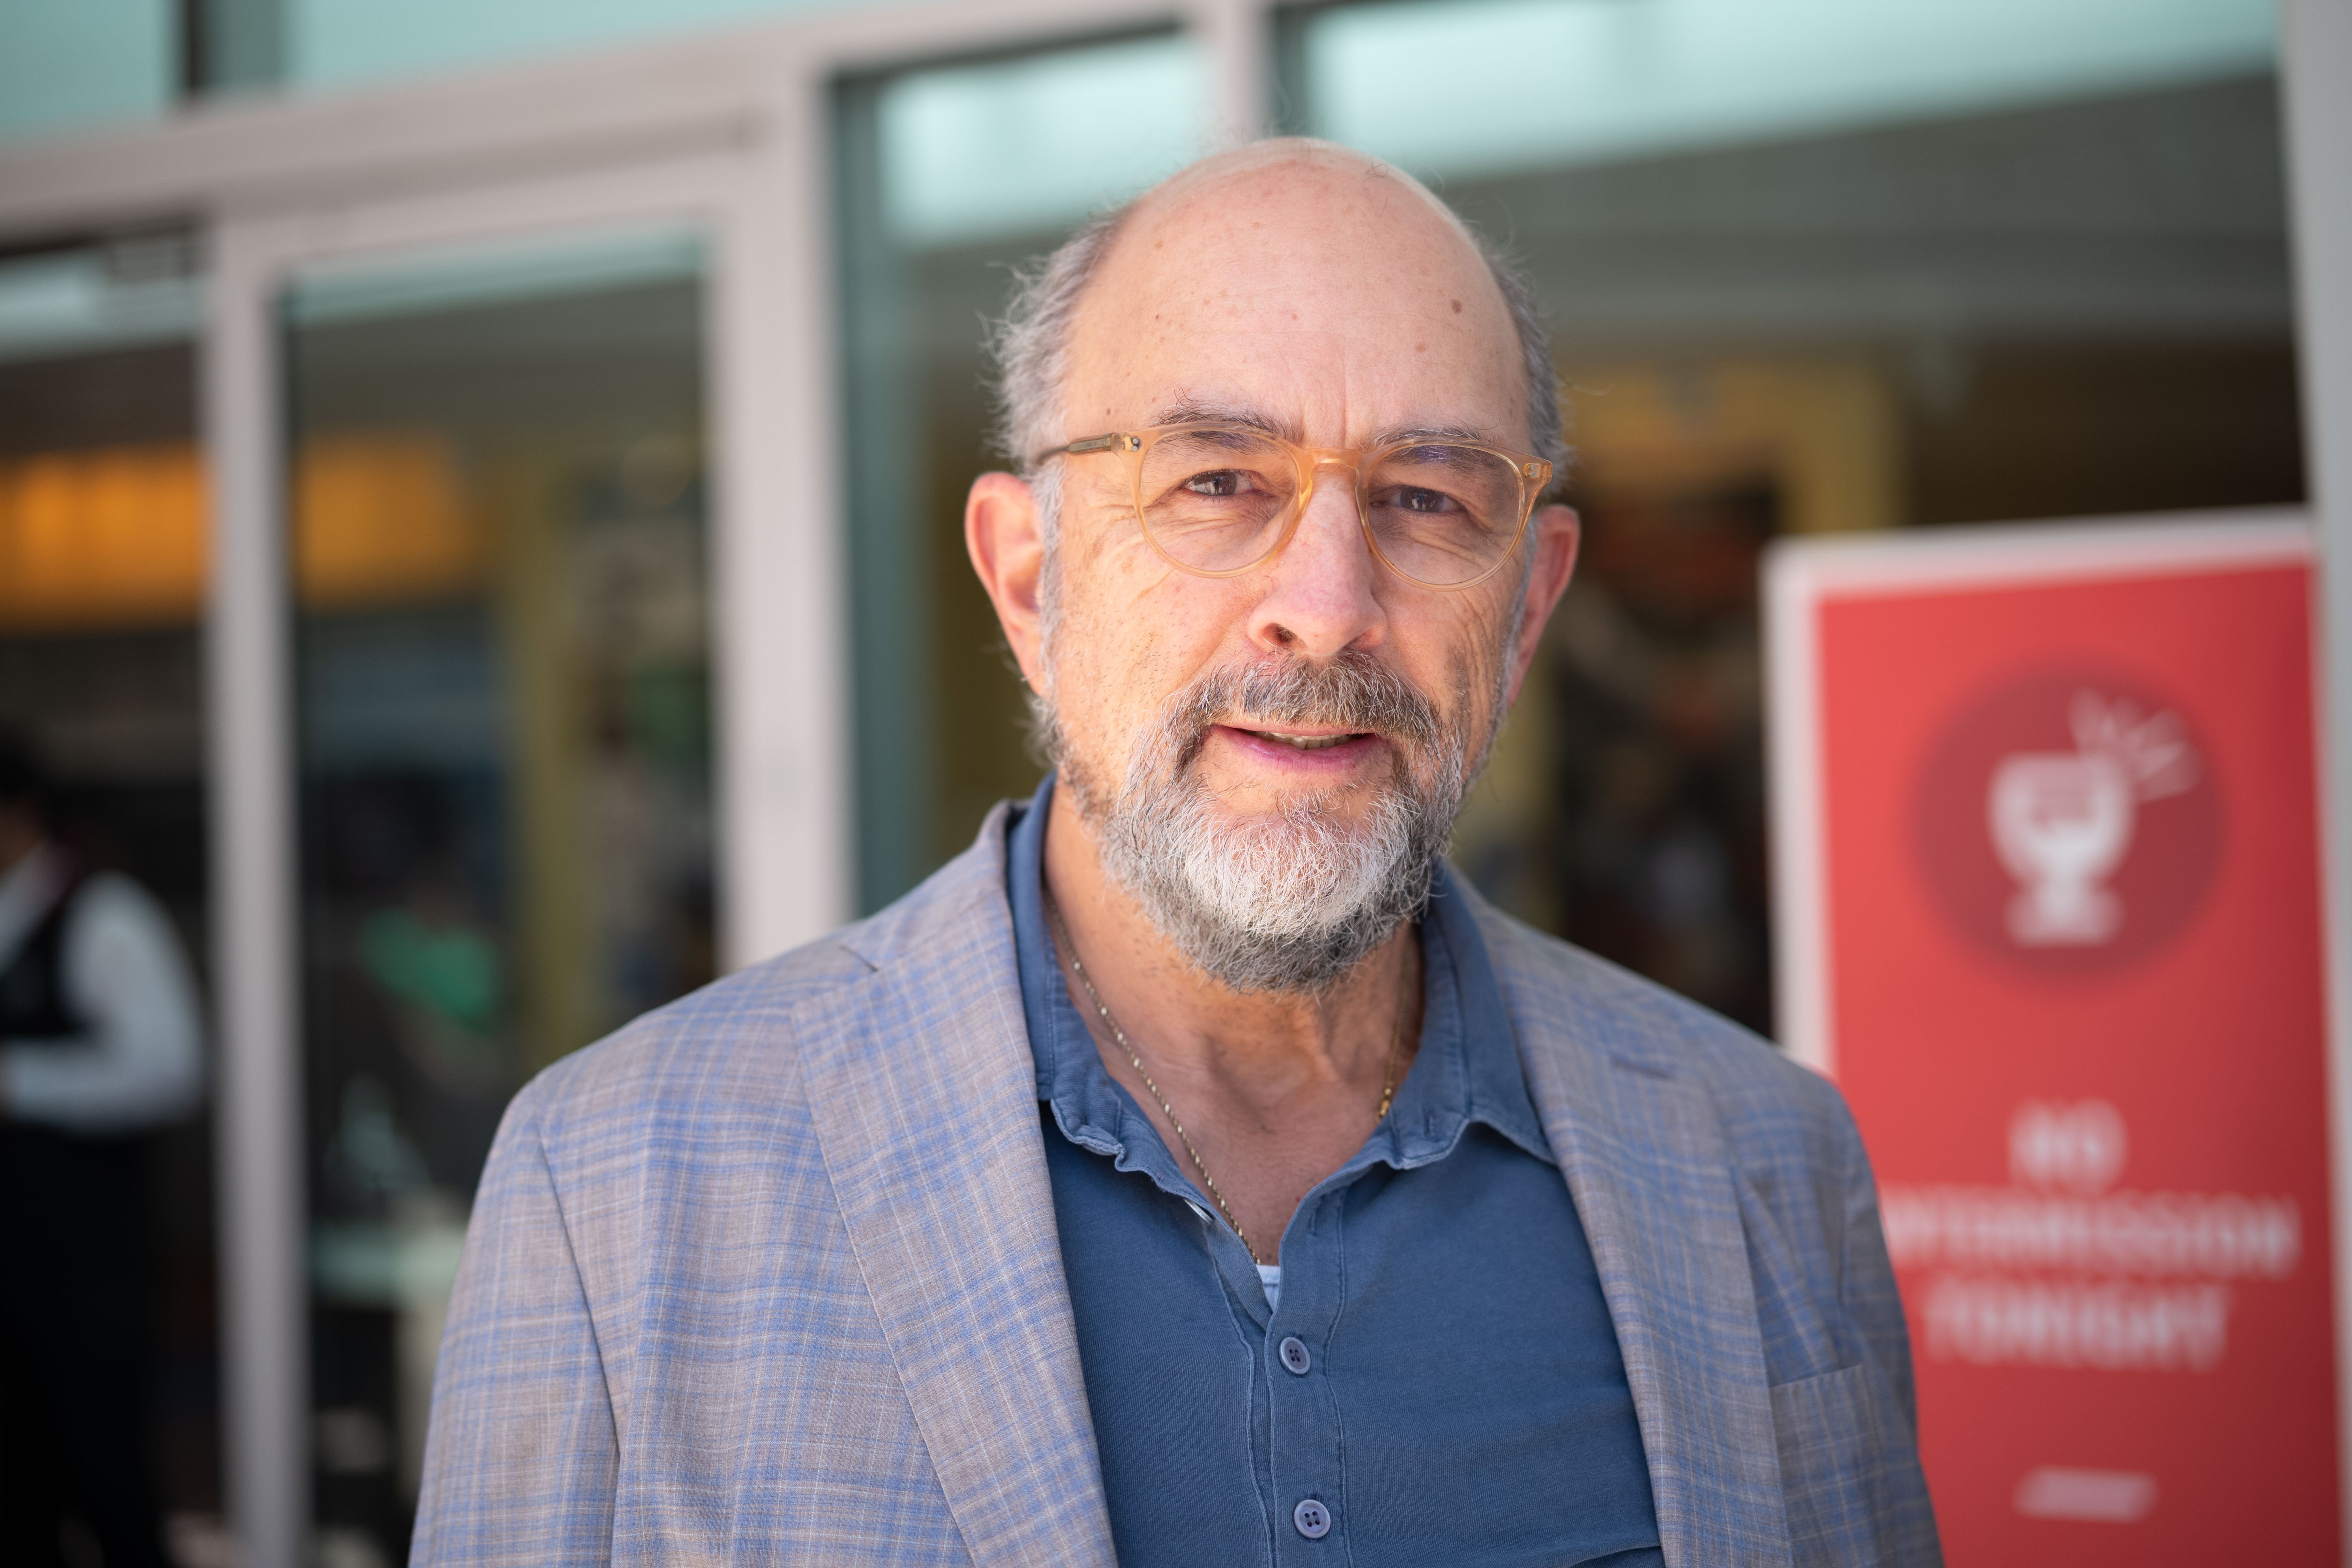 Richard Schiff attends the opening of "Indecent" in Los Angeles, California on June 9, 2019 | Photo: Getty Images